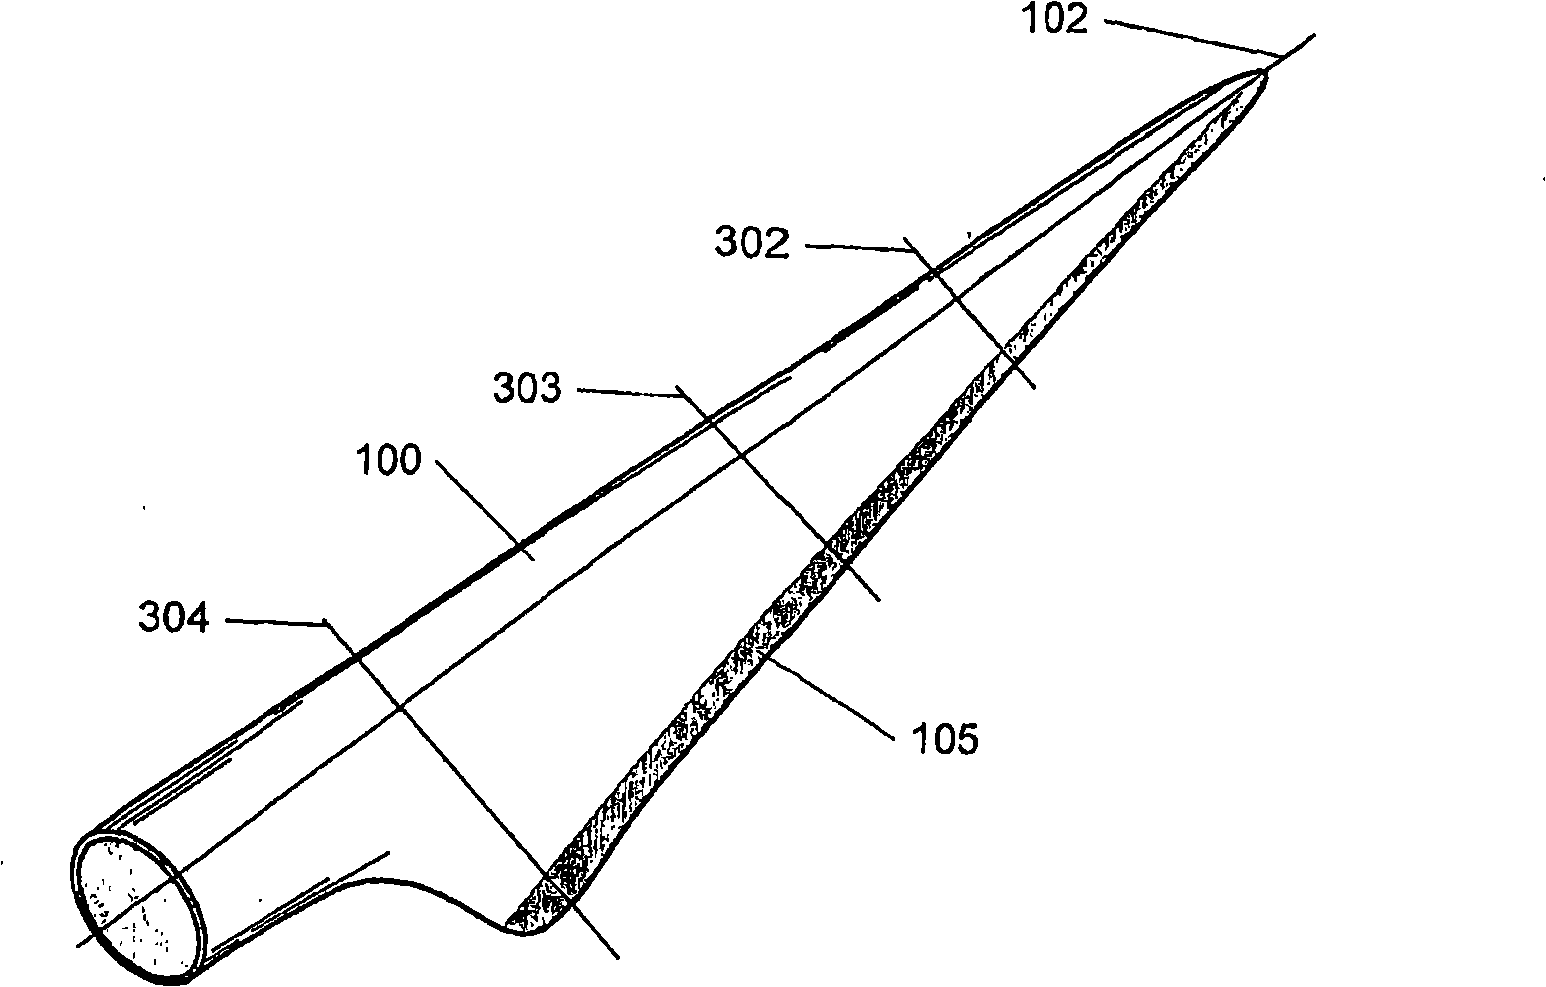 Wind turbine rotor blade comprising a trailing edge section of constant cross section